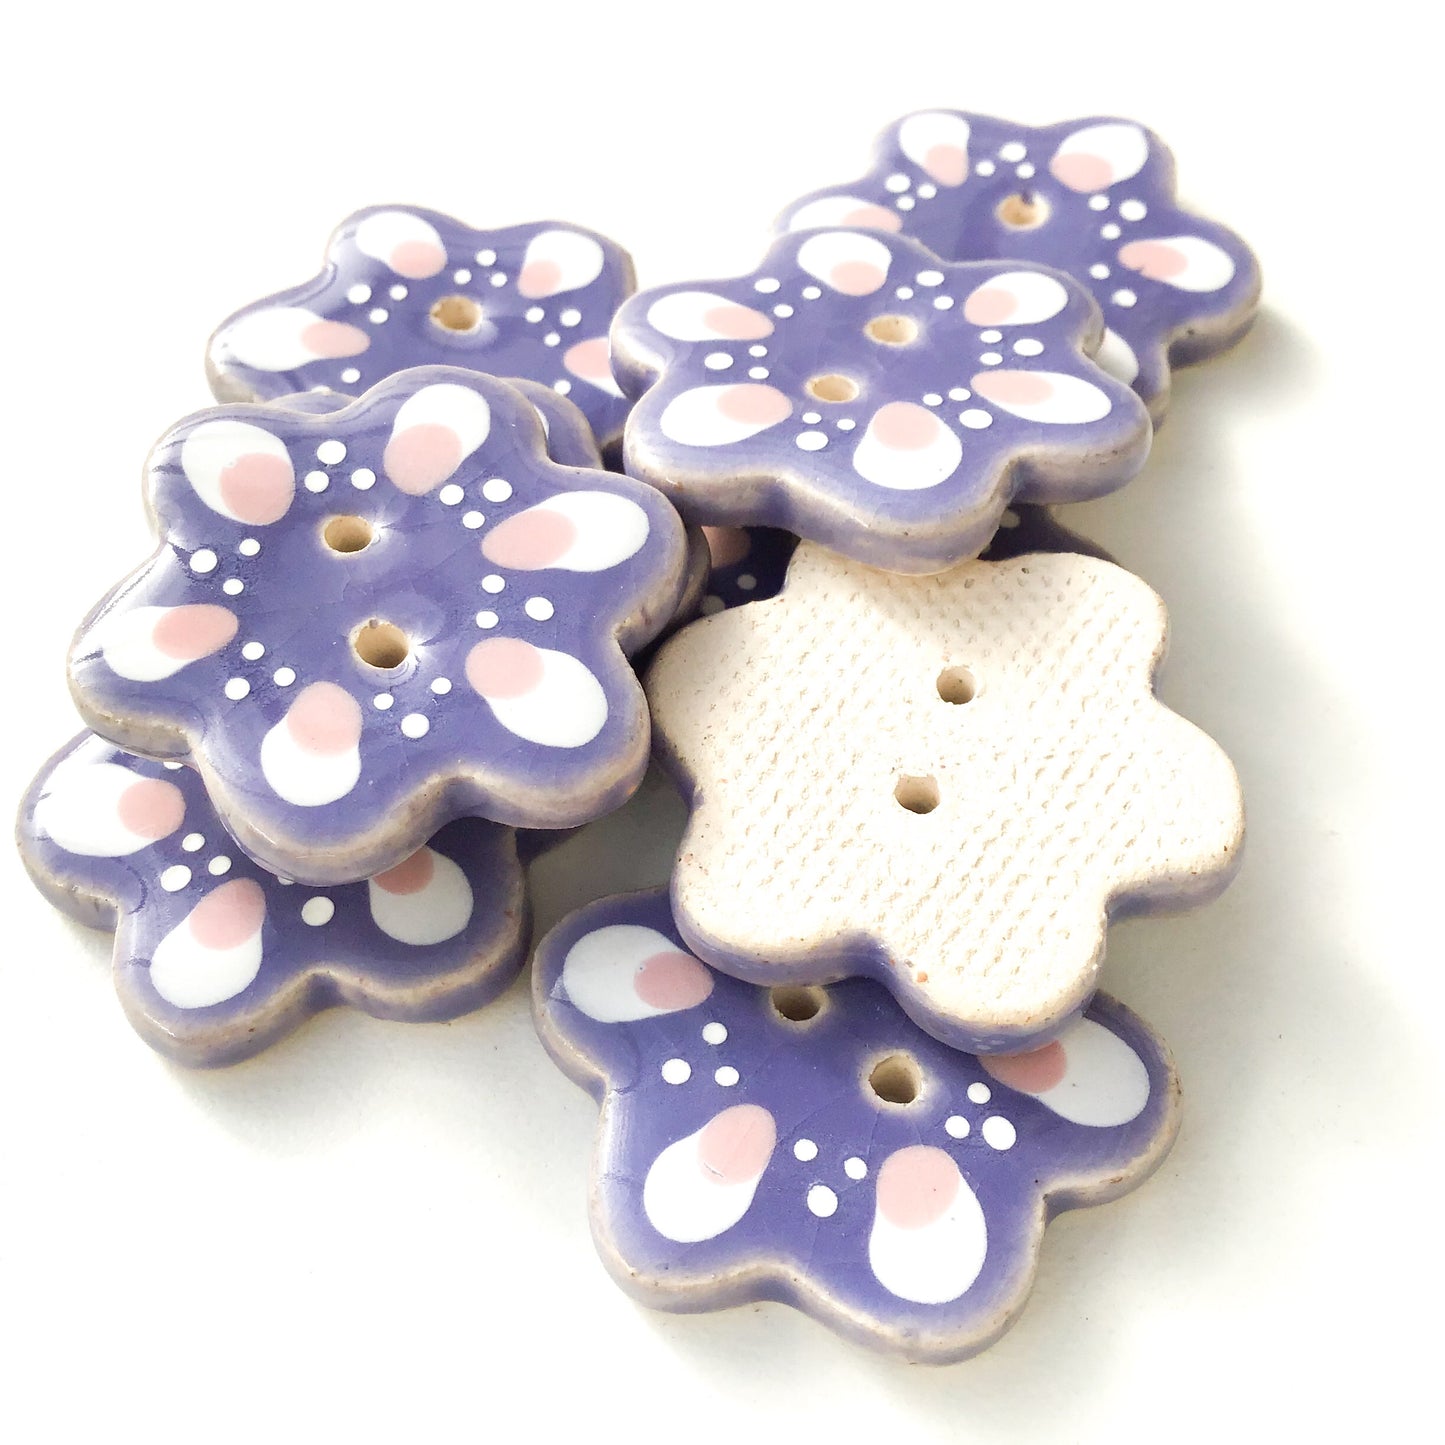 Purple Flower Shaped Ceramic Buttons - Decorative Clay Buttons - 1  1/4"